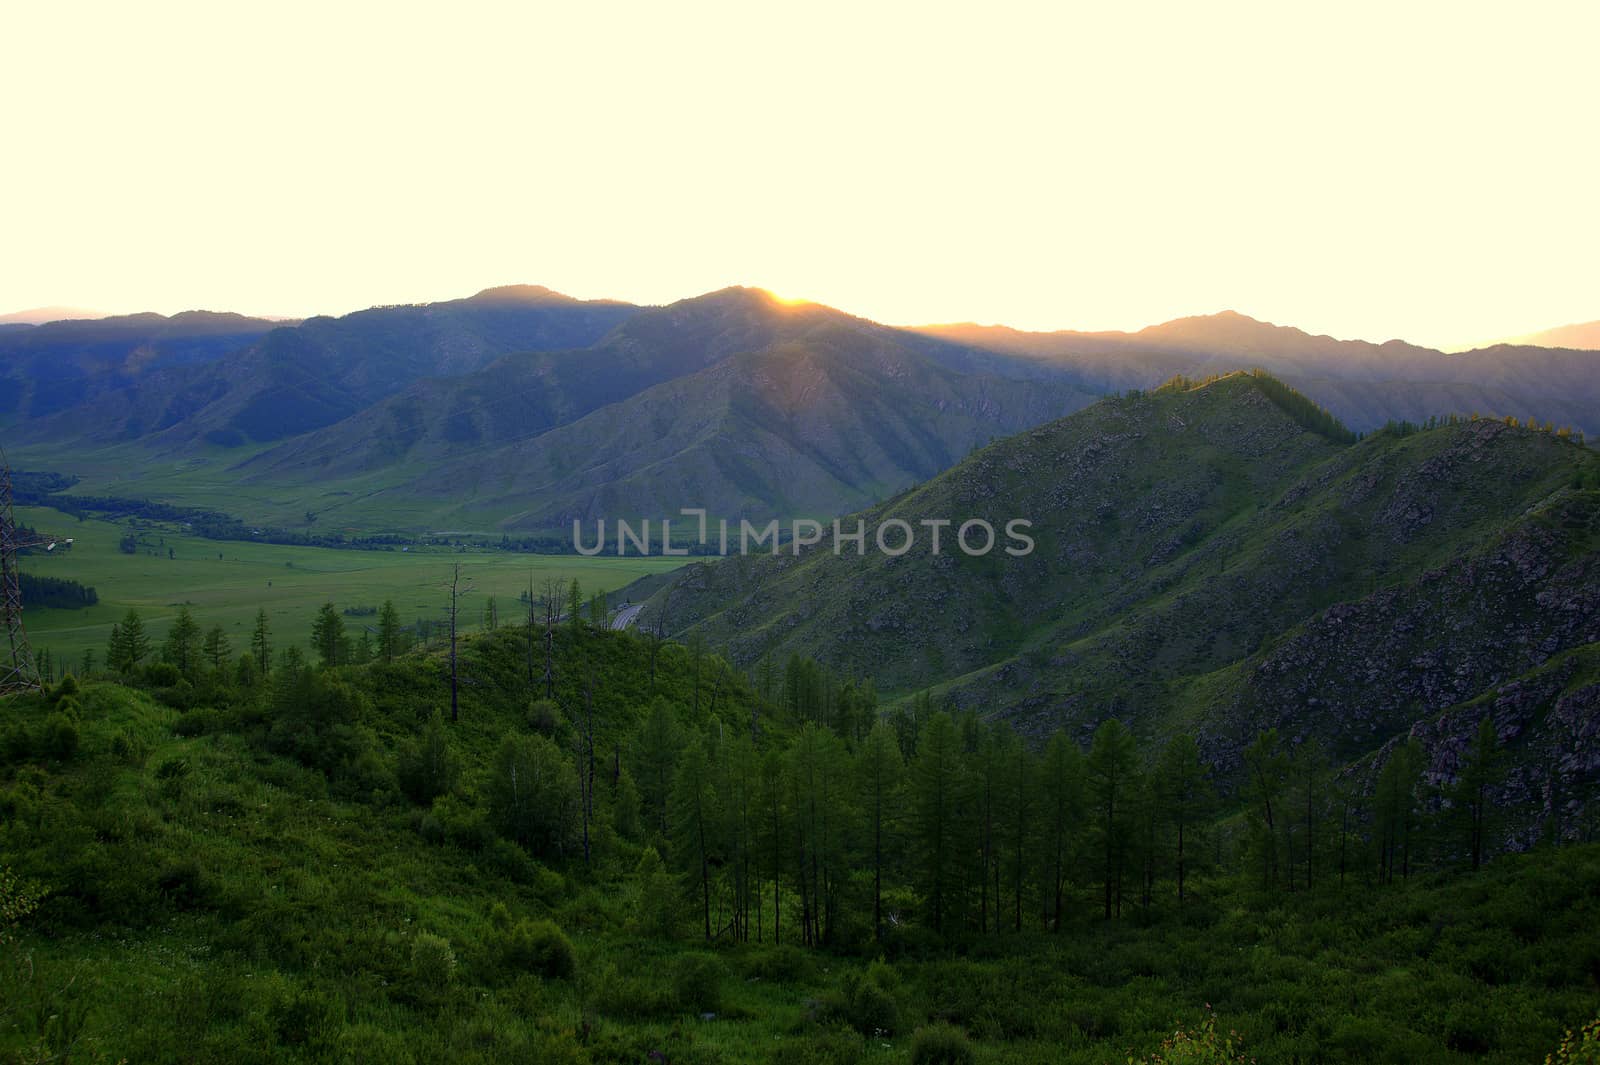 Sunset in a mountain valley, the last rays of the sun touched the peaks. Altai, Siberia, Russia.